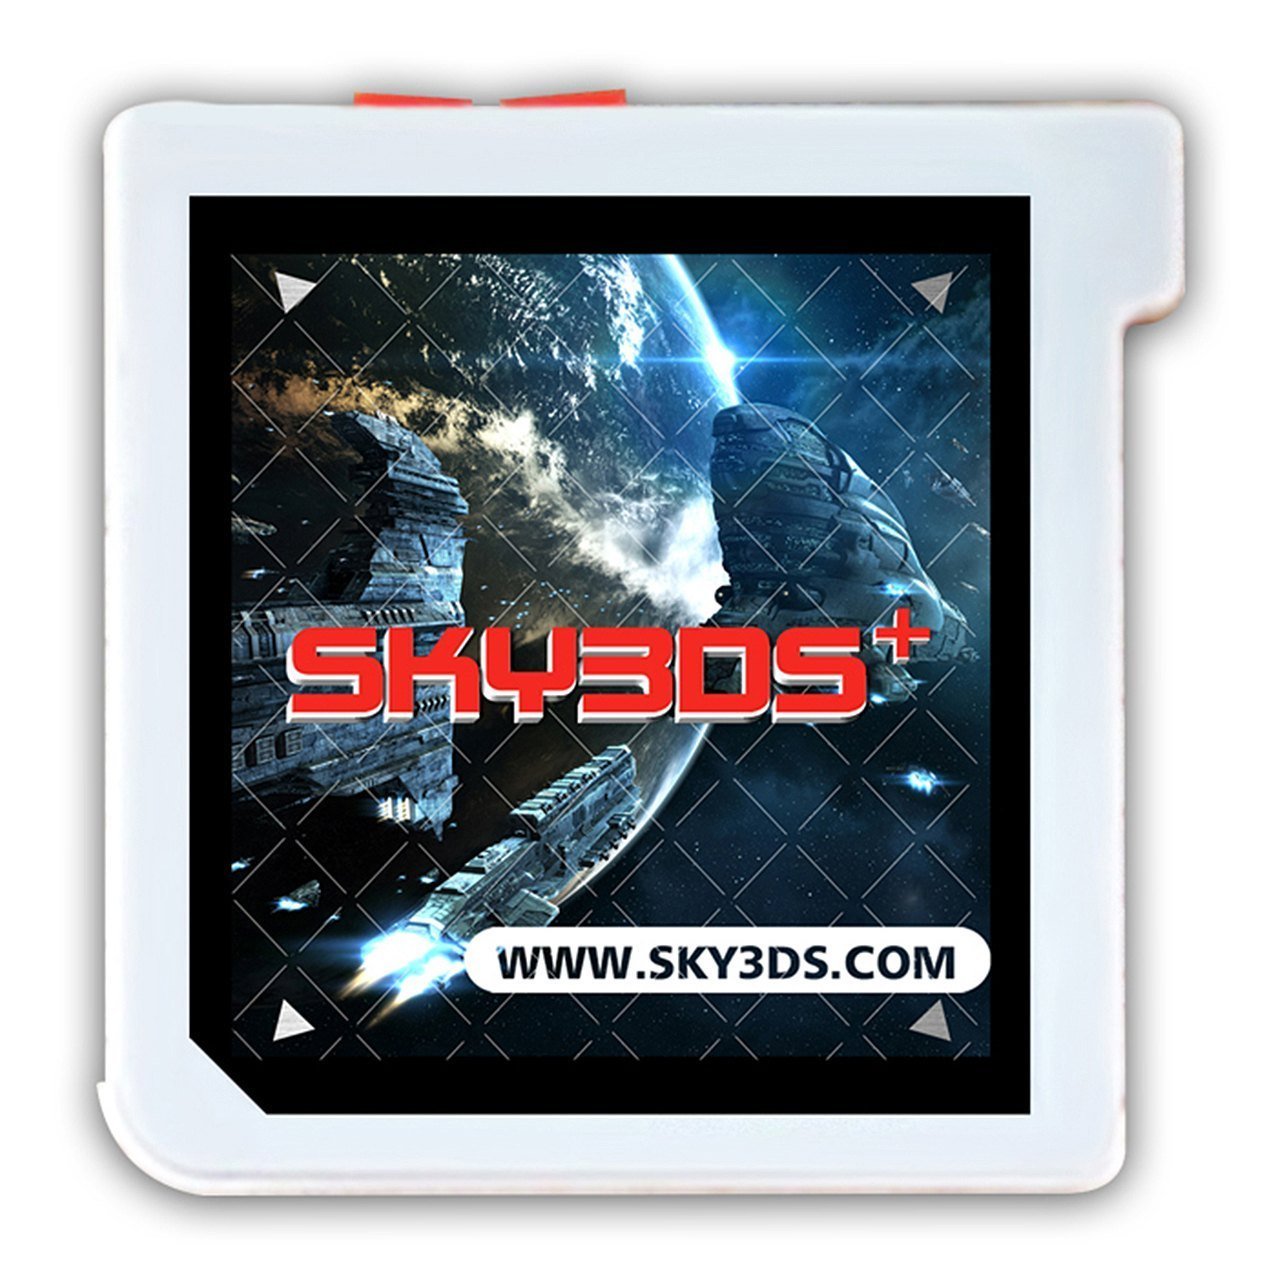 Sky3DS+ Review (Hardware) - Official GBAtemp Review | GBAtemp.net - The  Independent Video Game Community